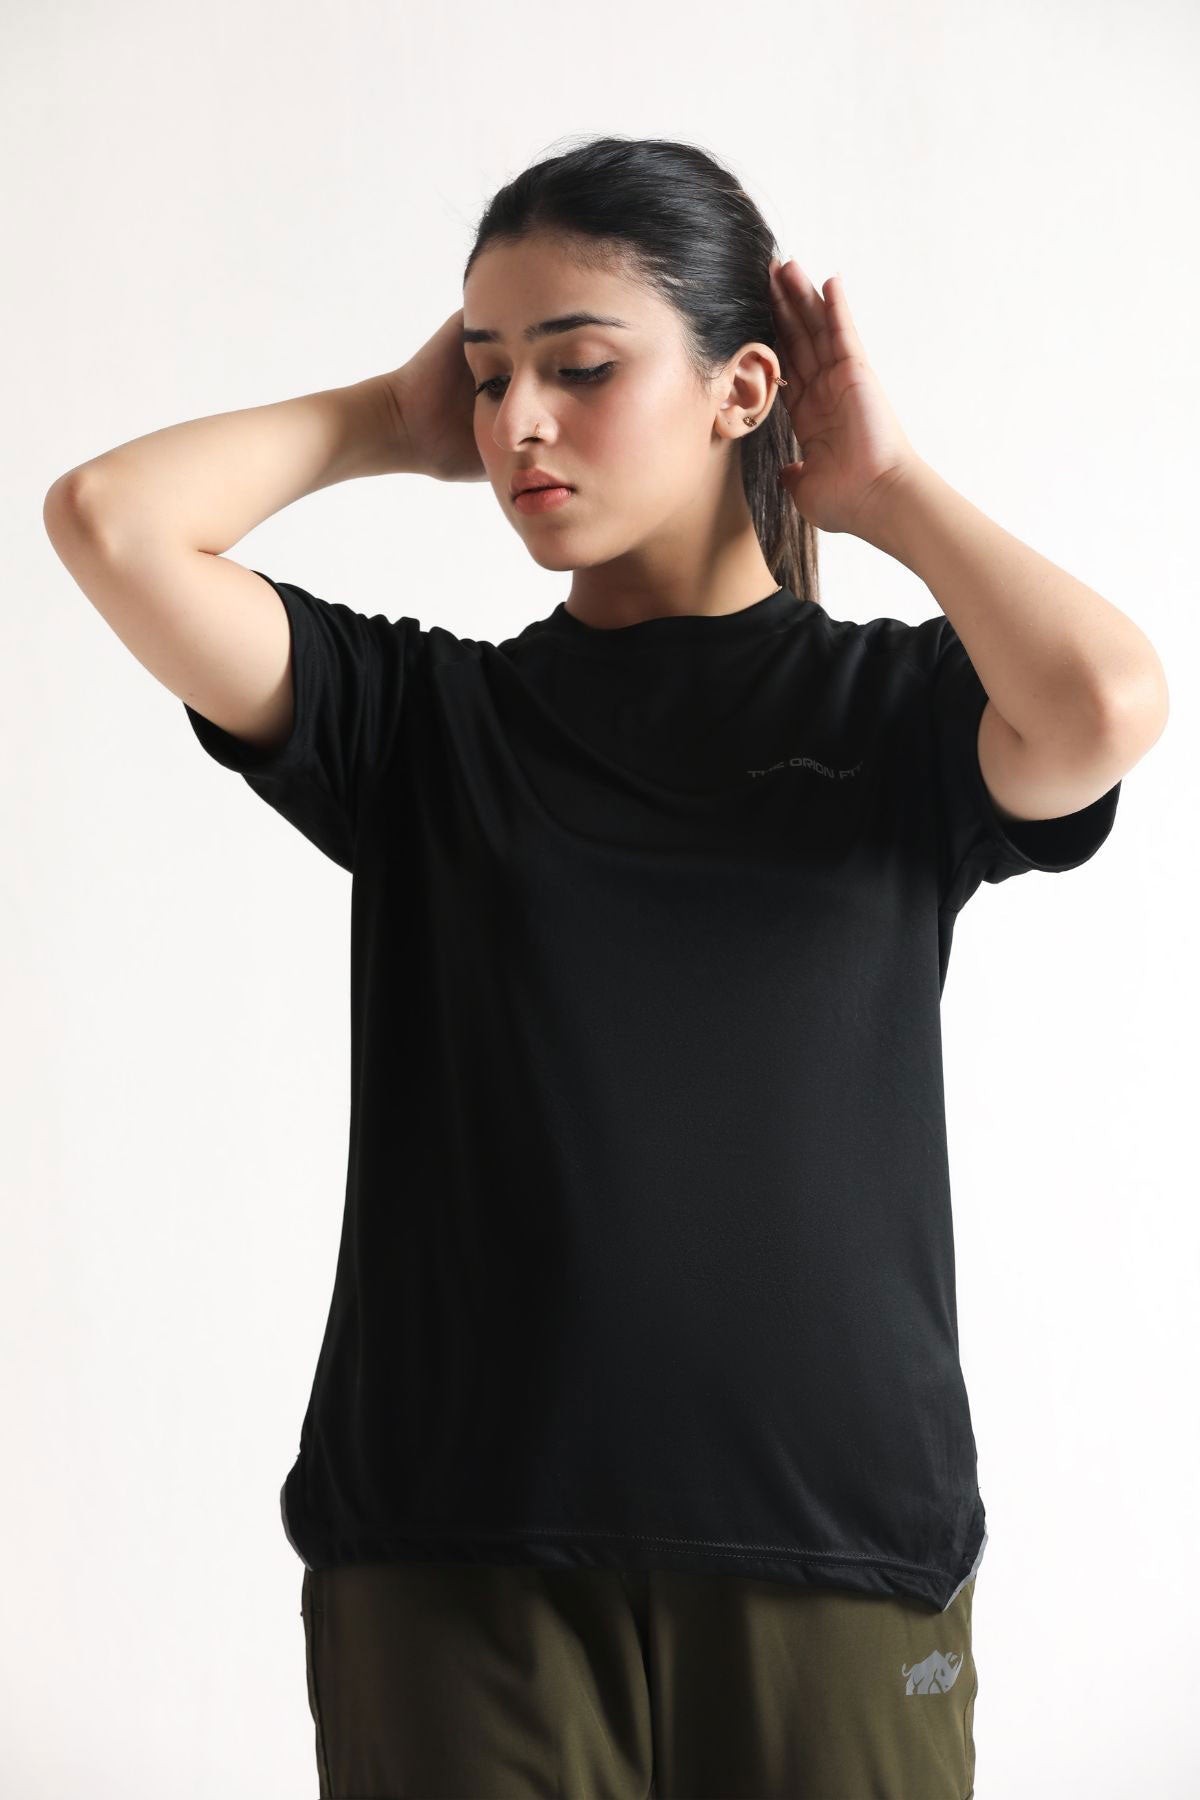 AMPLIFY DRI FIT SUPER BLACK TEE - The Orion Fit